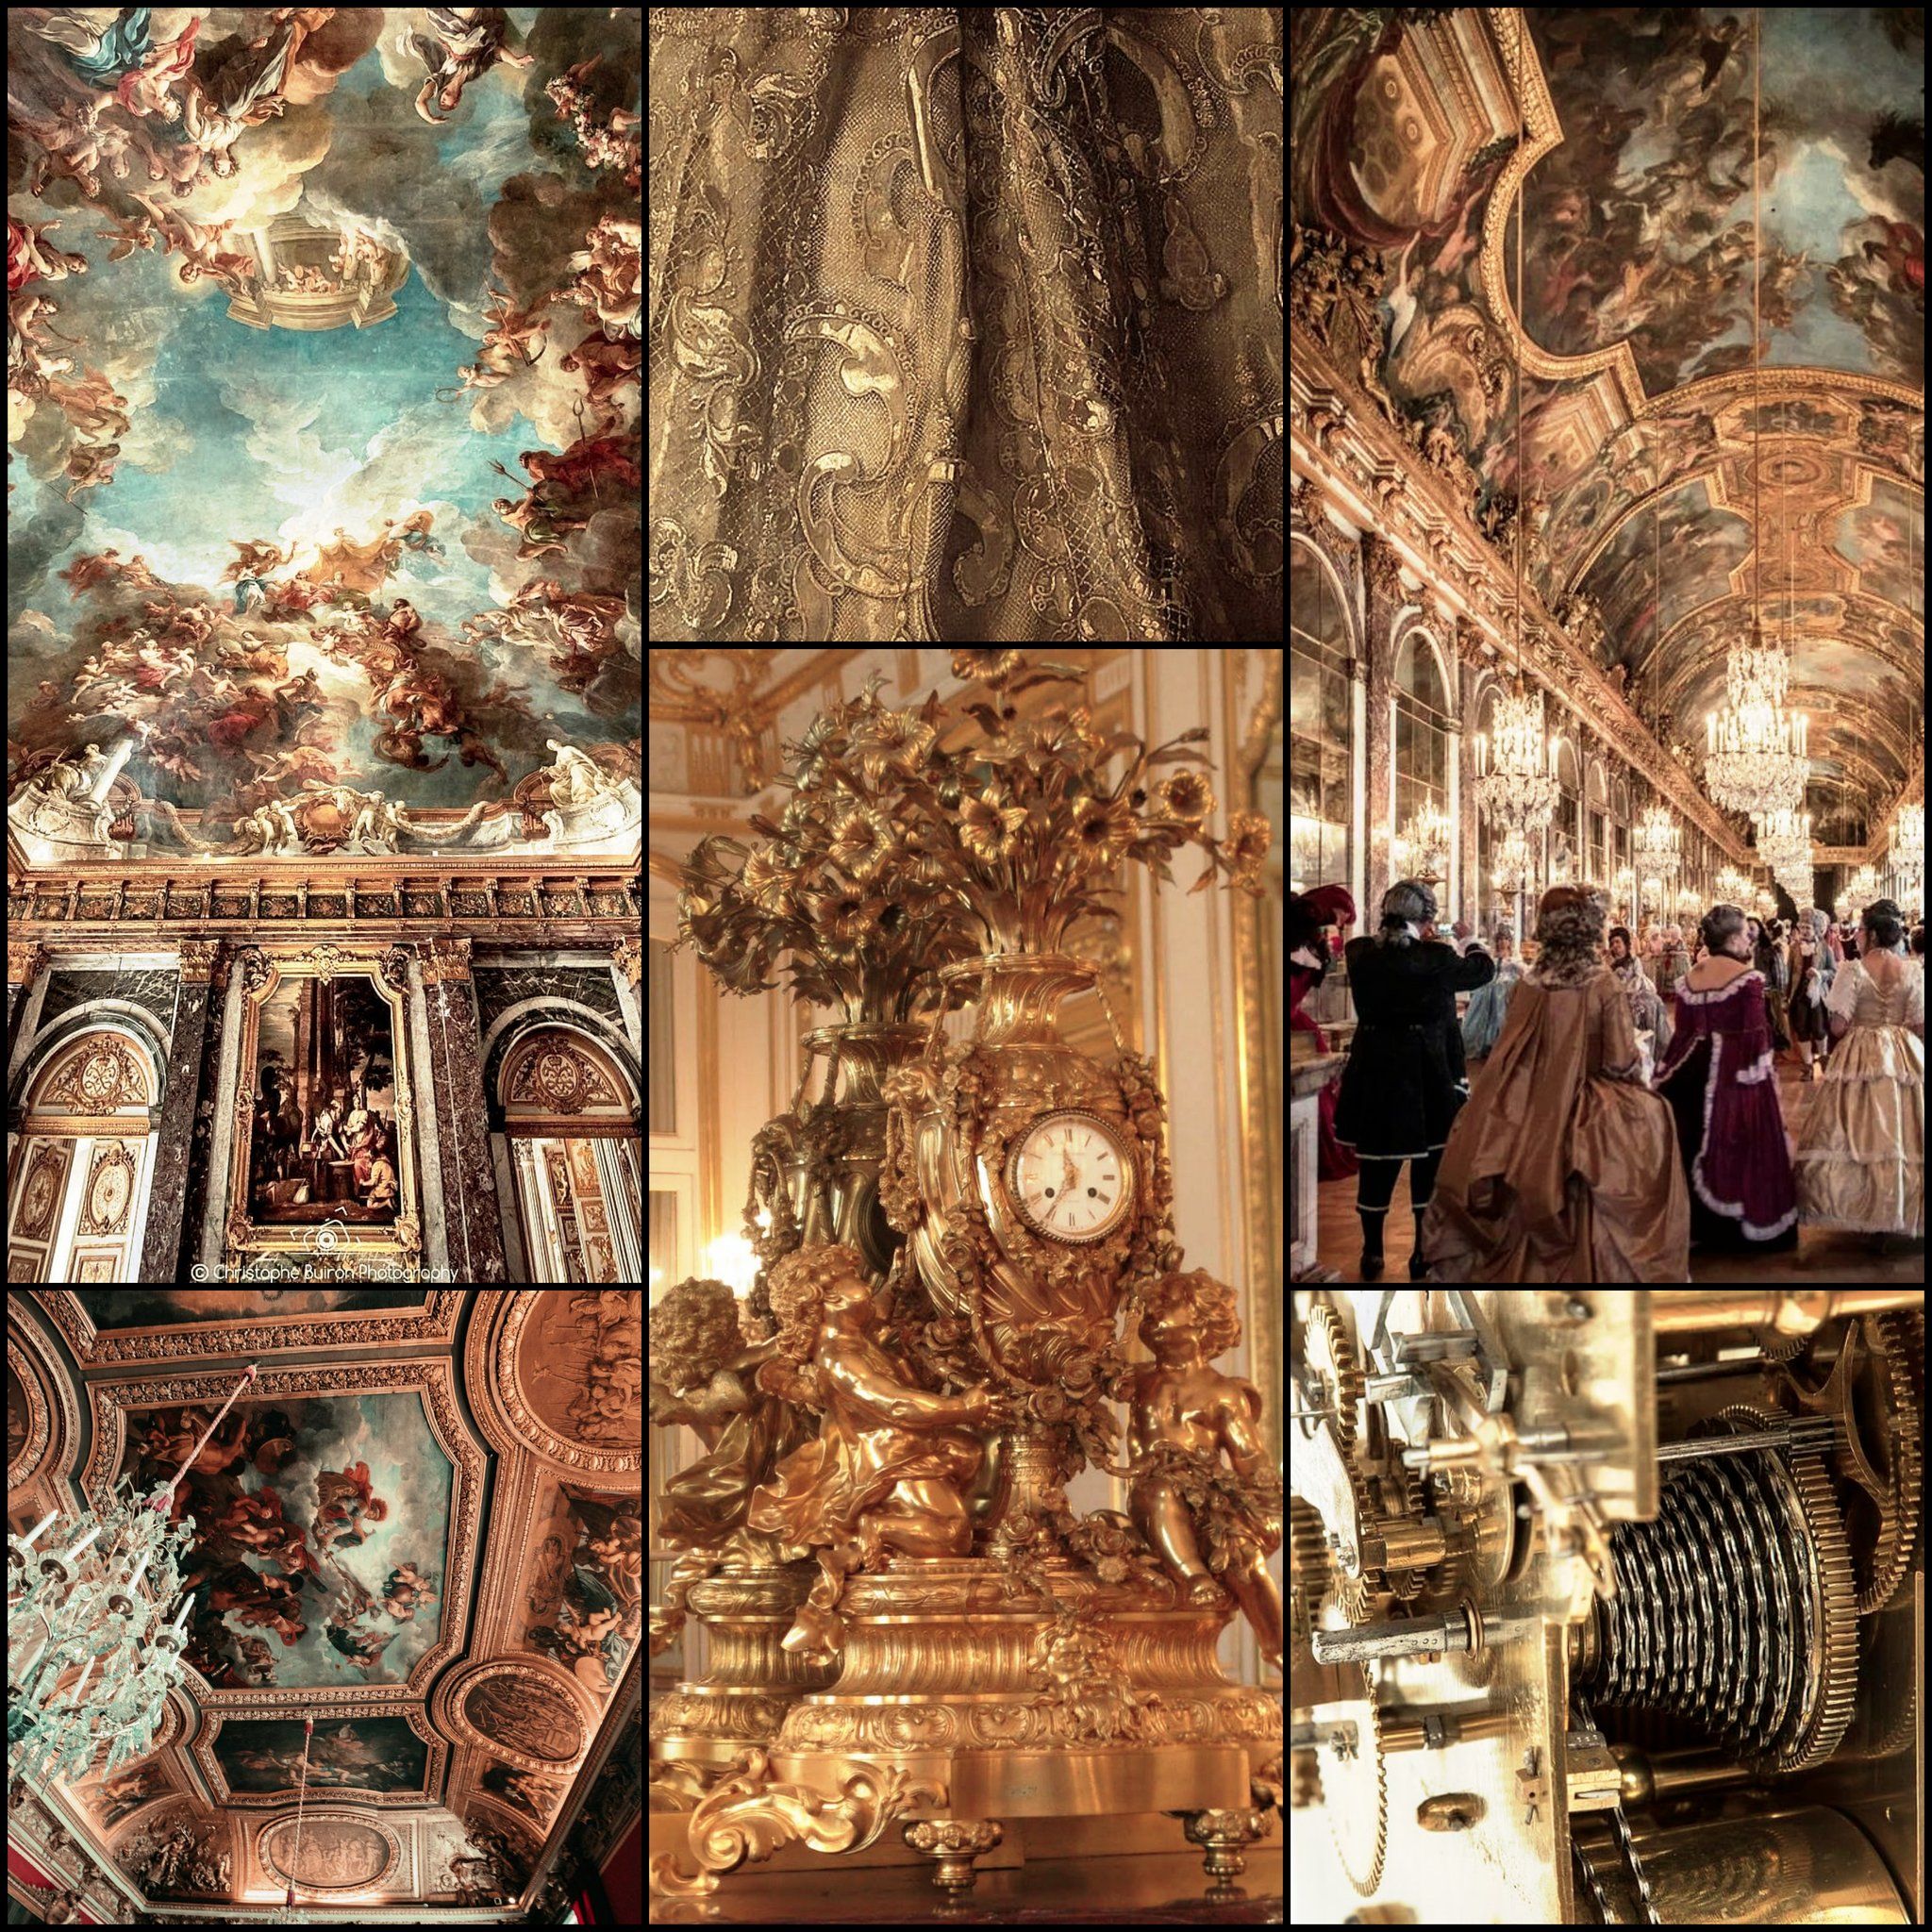 A collage of images of Versailles, including the Hall of Mirrors, the Hall of Enamel, and the Grand Trianon. - Royalcore